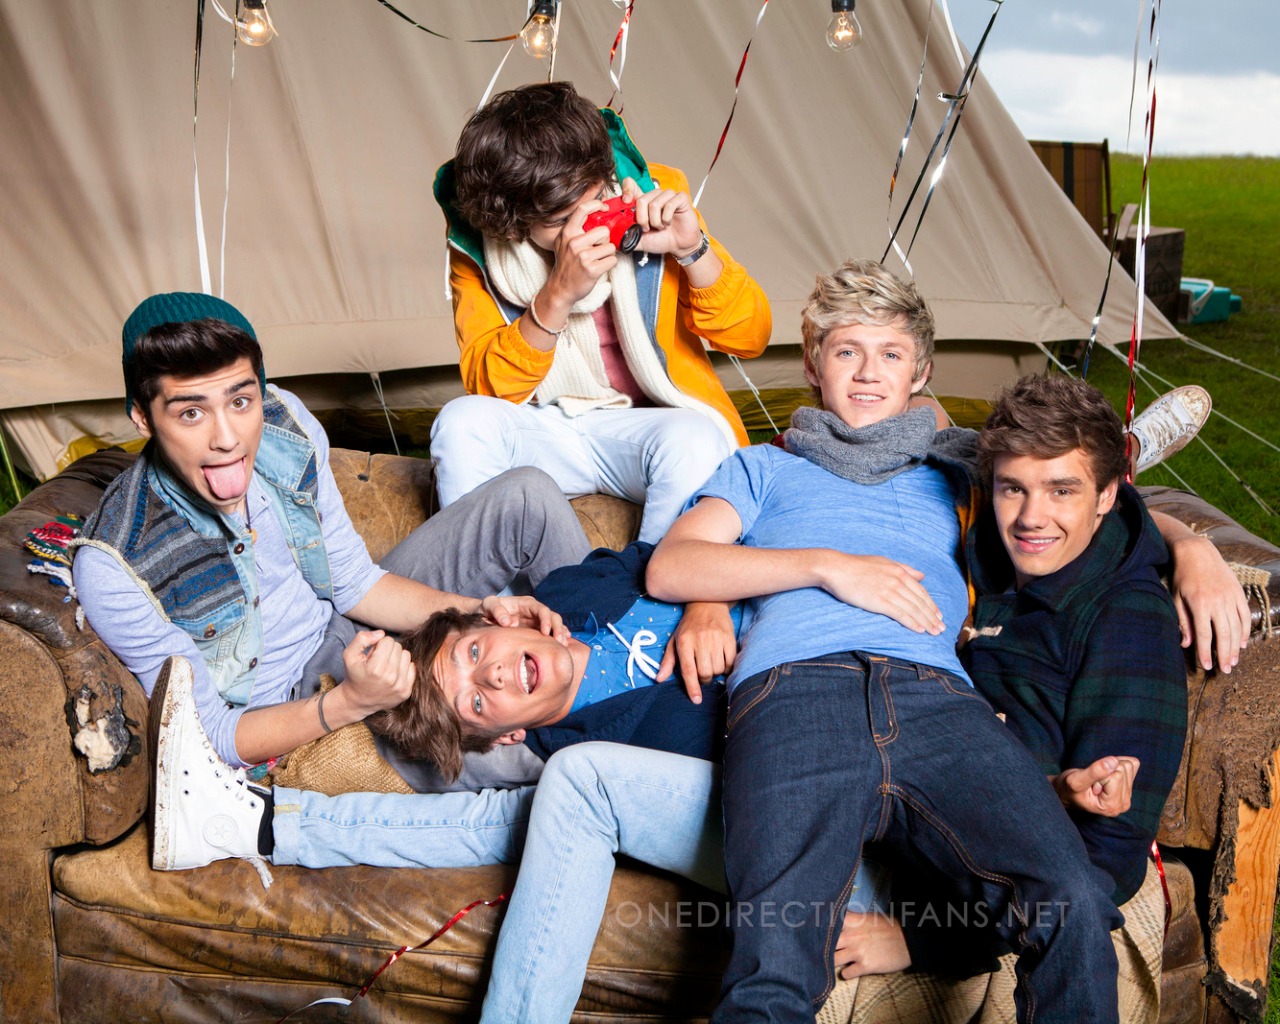 http://images6.fanpop.com/image/photos/33500000/one-direction-x-one-direction-33554803-1280-1024.jpg